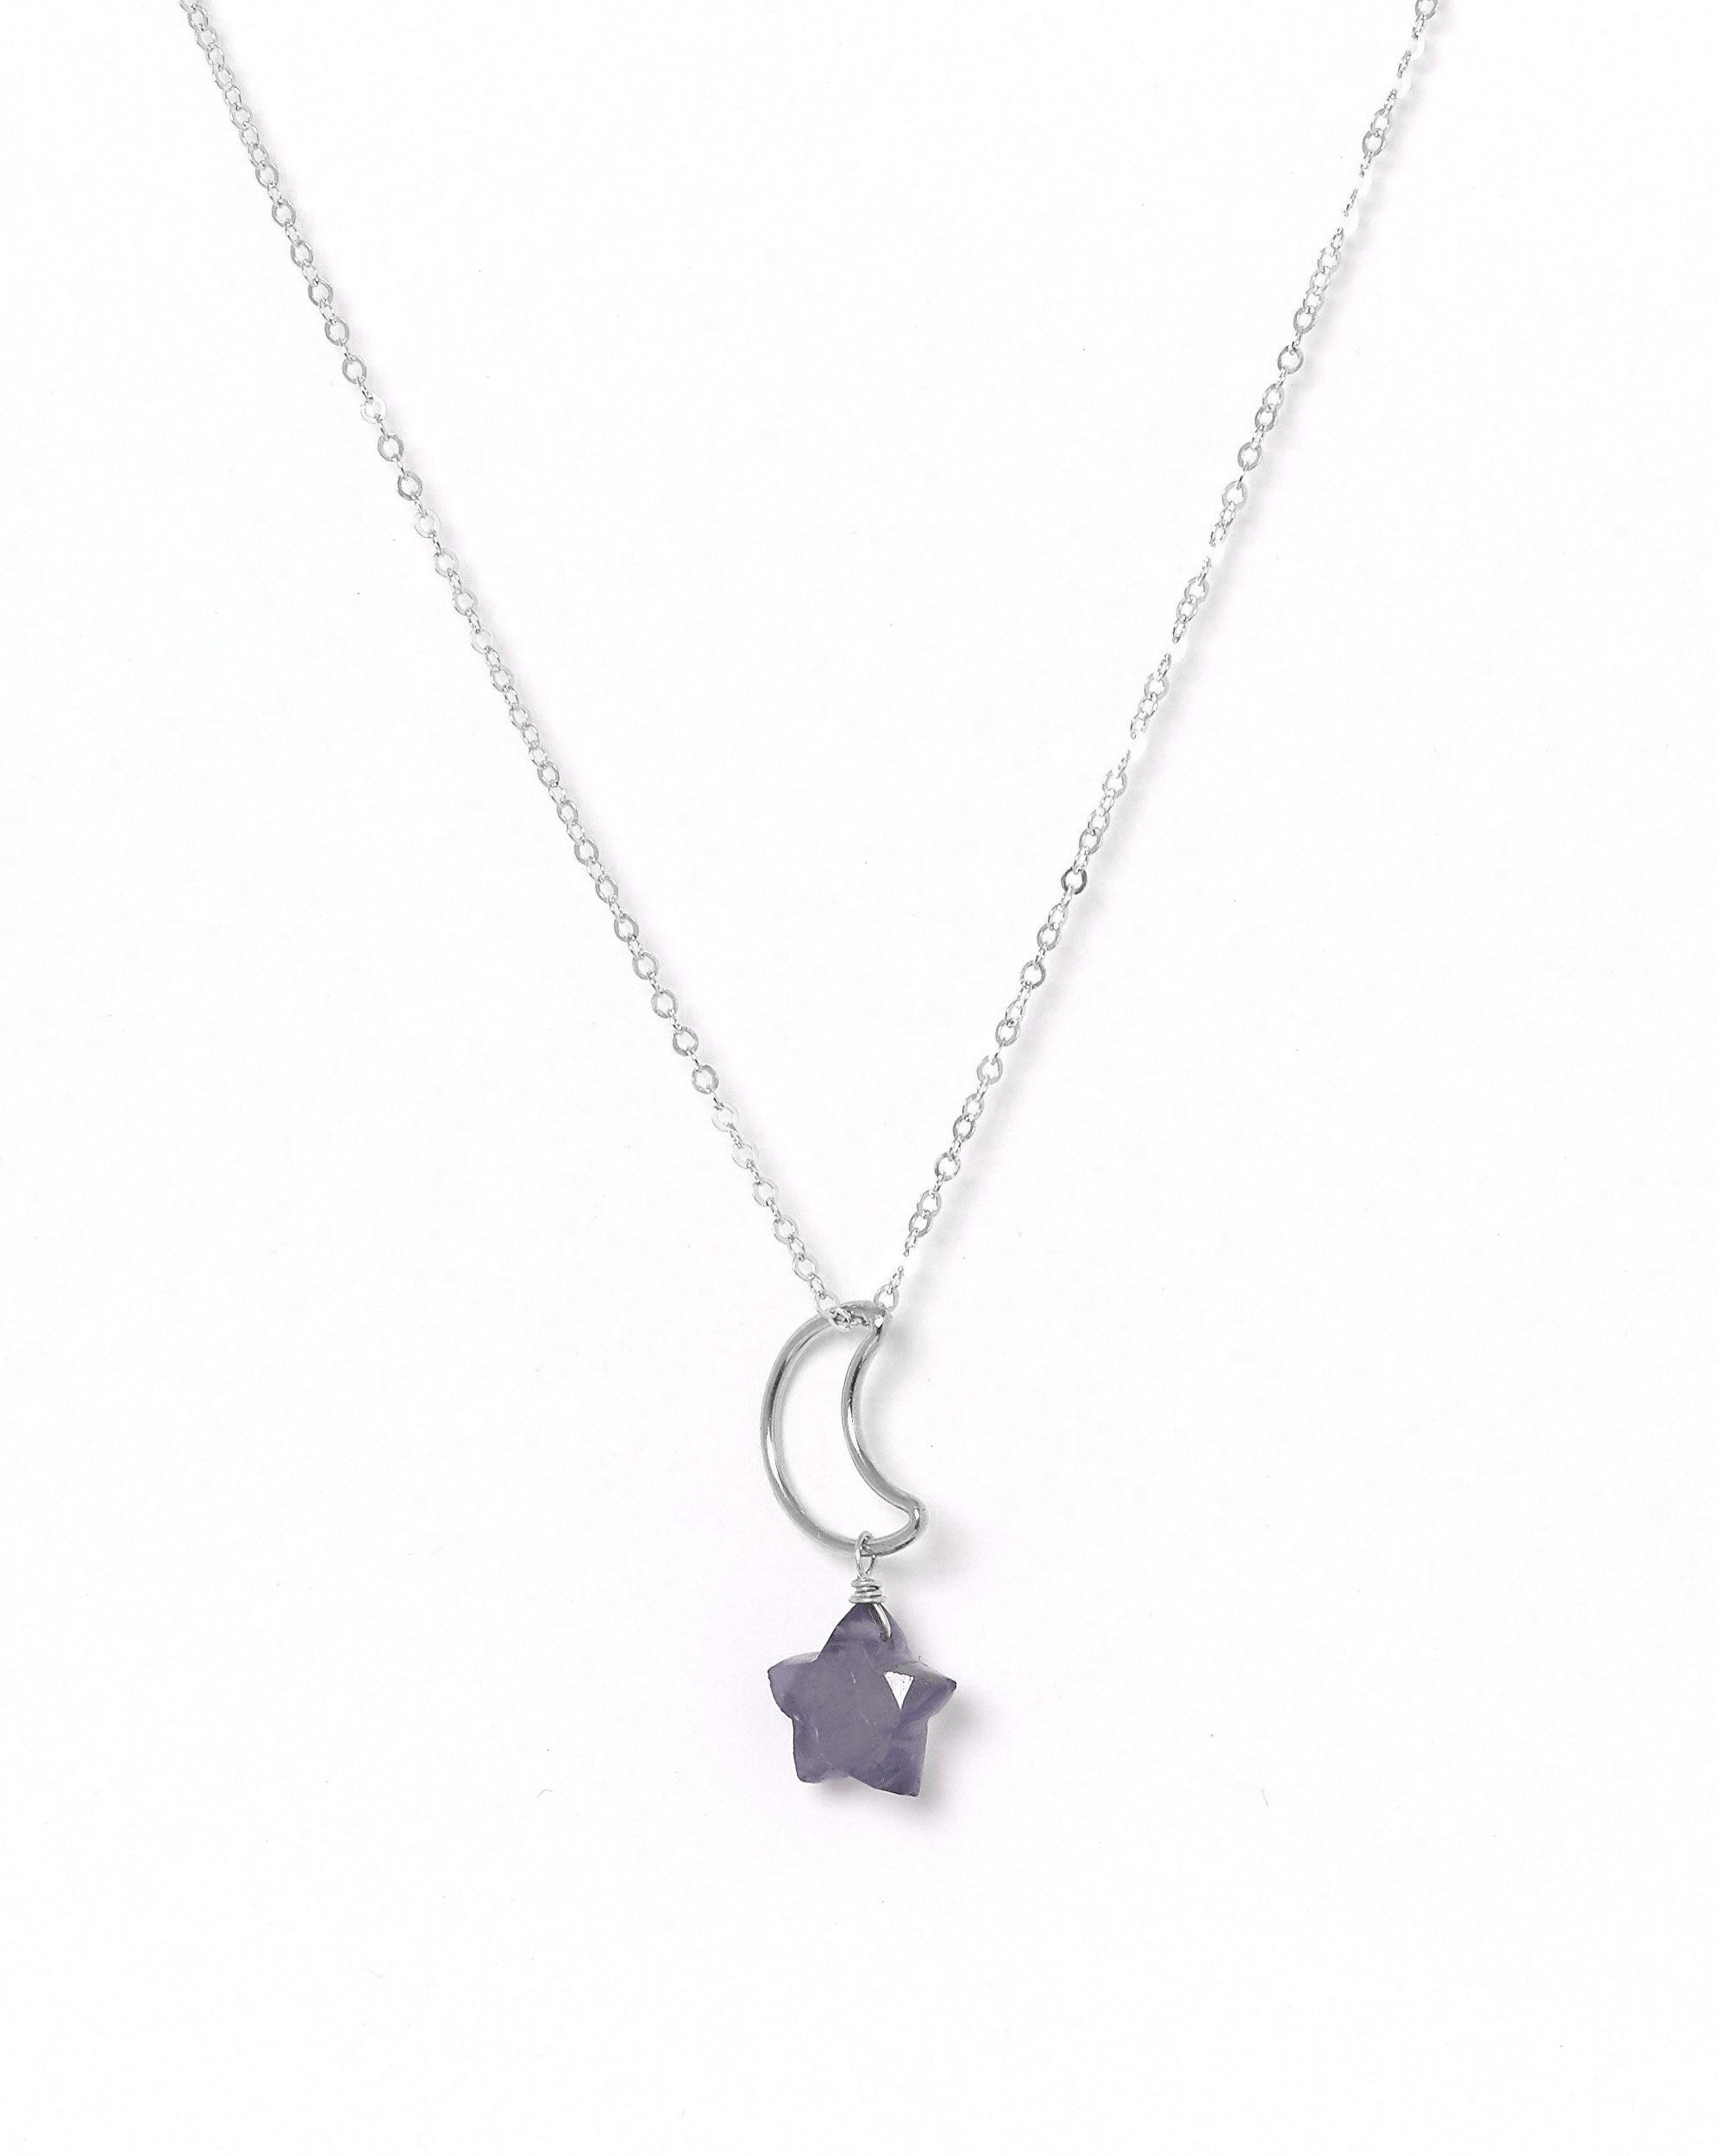 Lunastar Necklace by KOZAKH. A 16 to 18 inch adjustable length necklace, crafted in Sterling Silver, featuring a 13mm moon charm and an Iolite star charm.